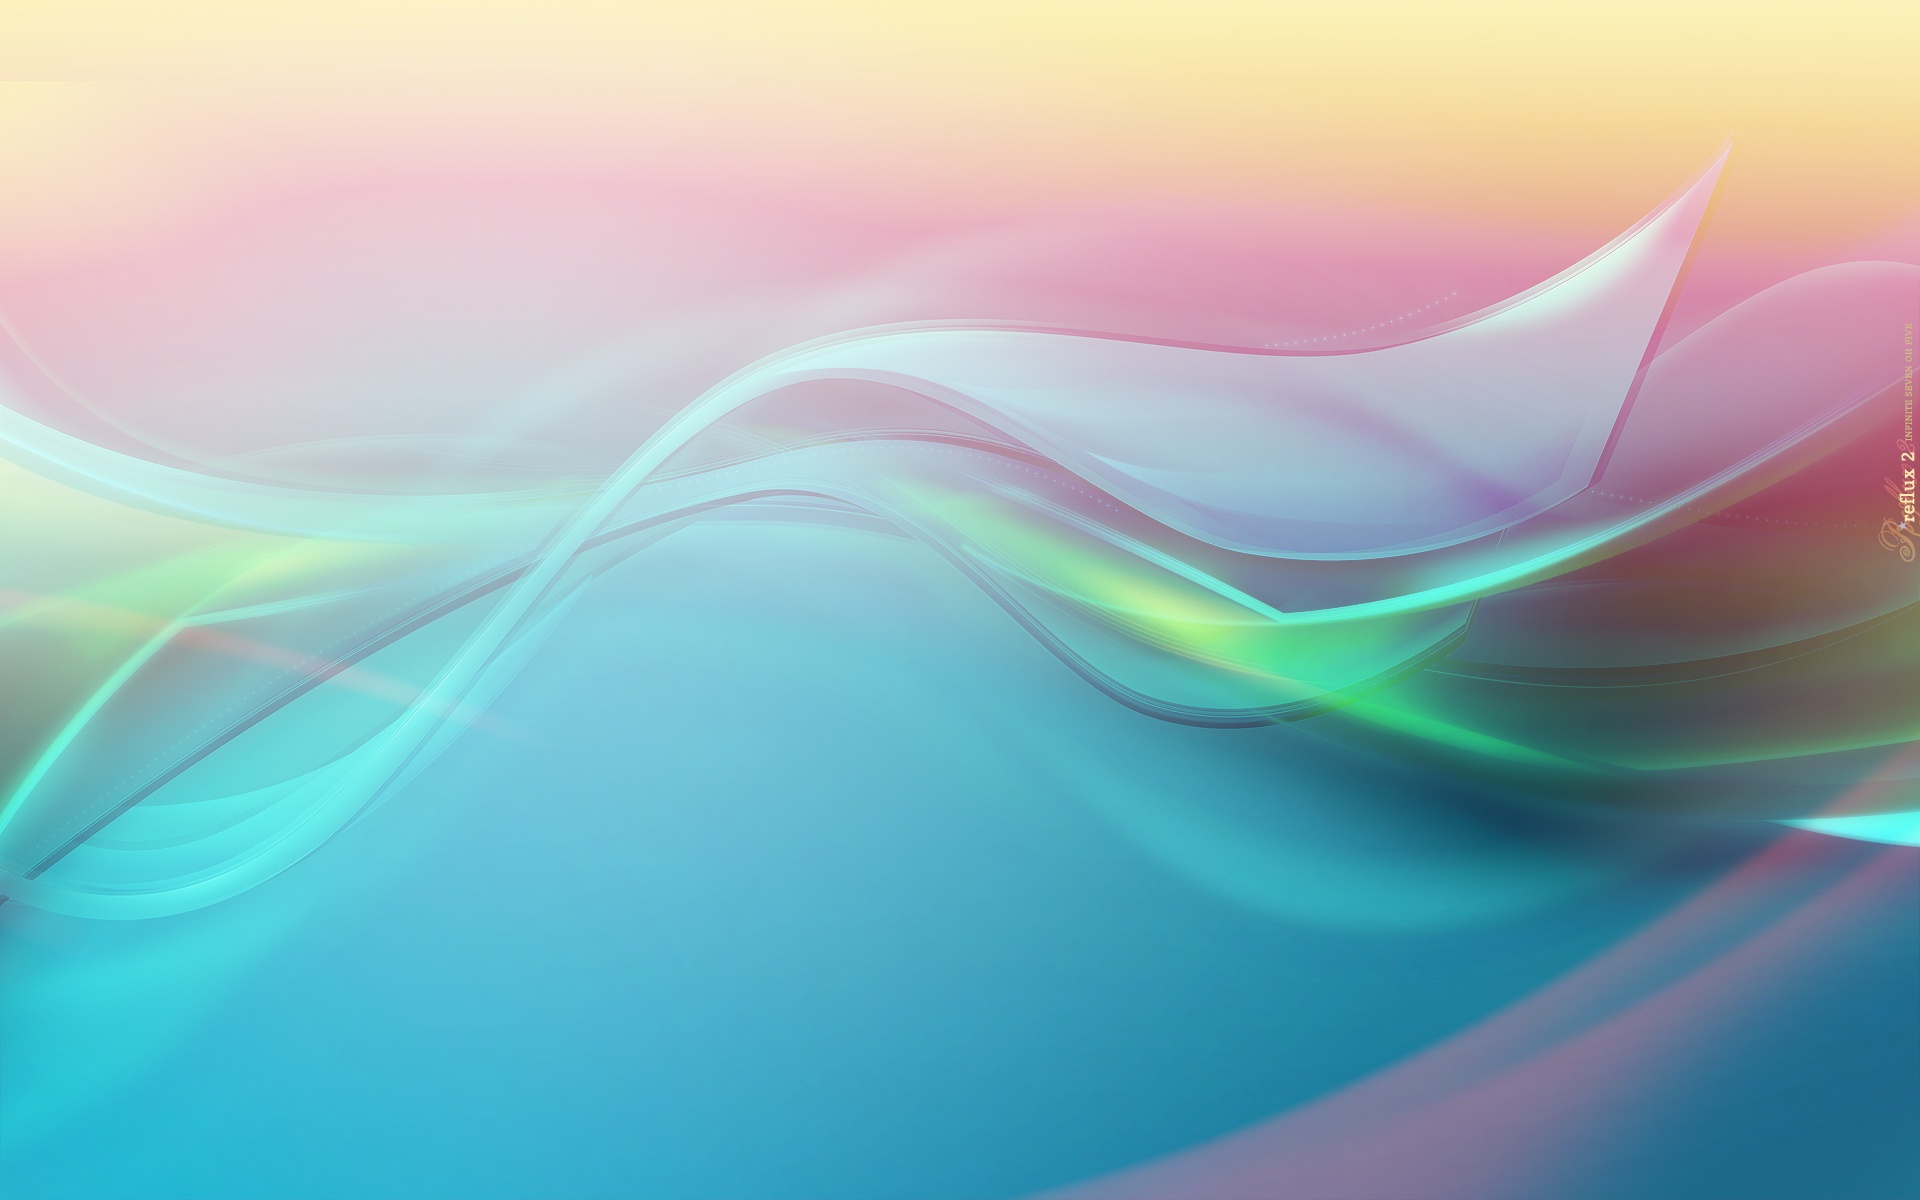 Abstract Colorful Wallpapers